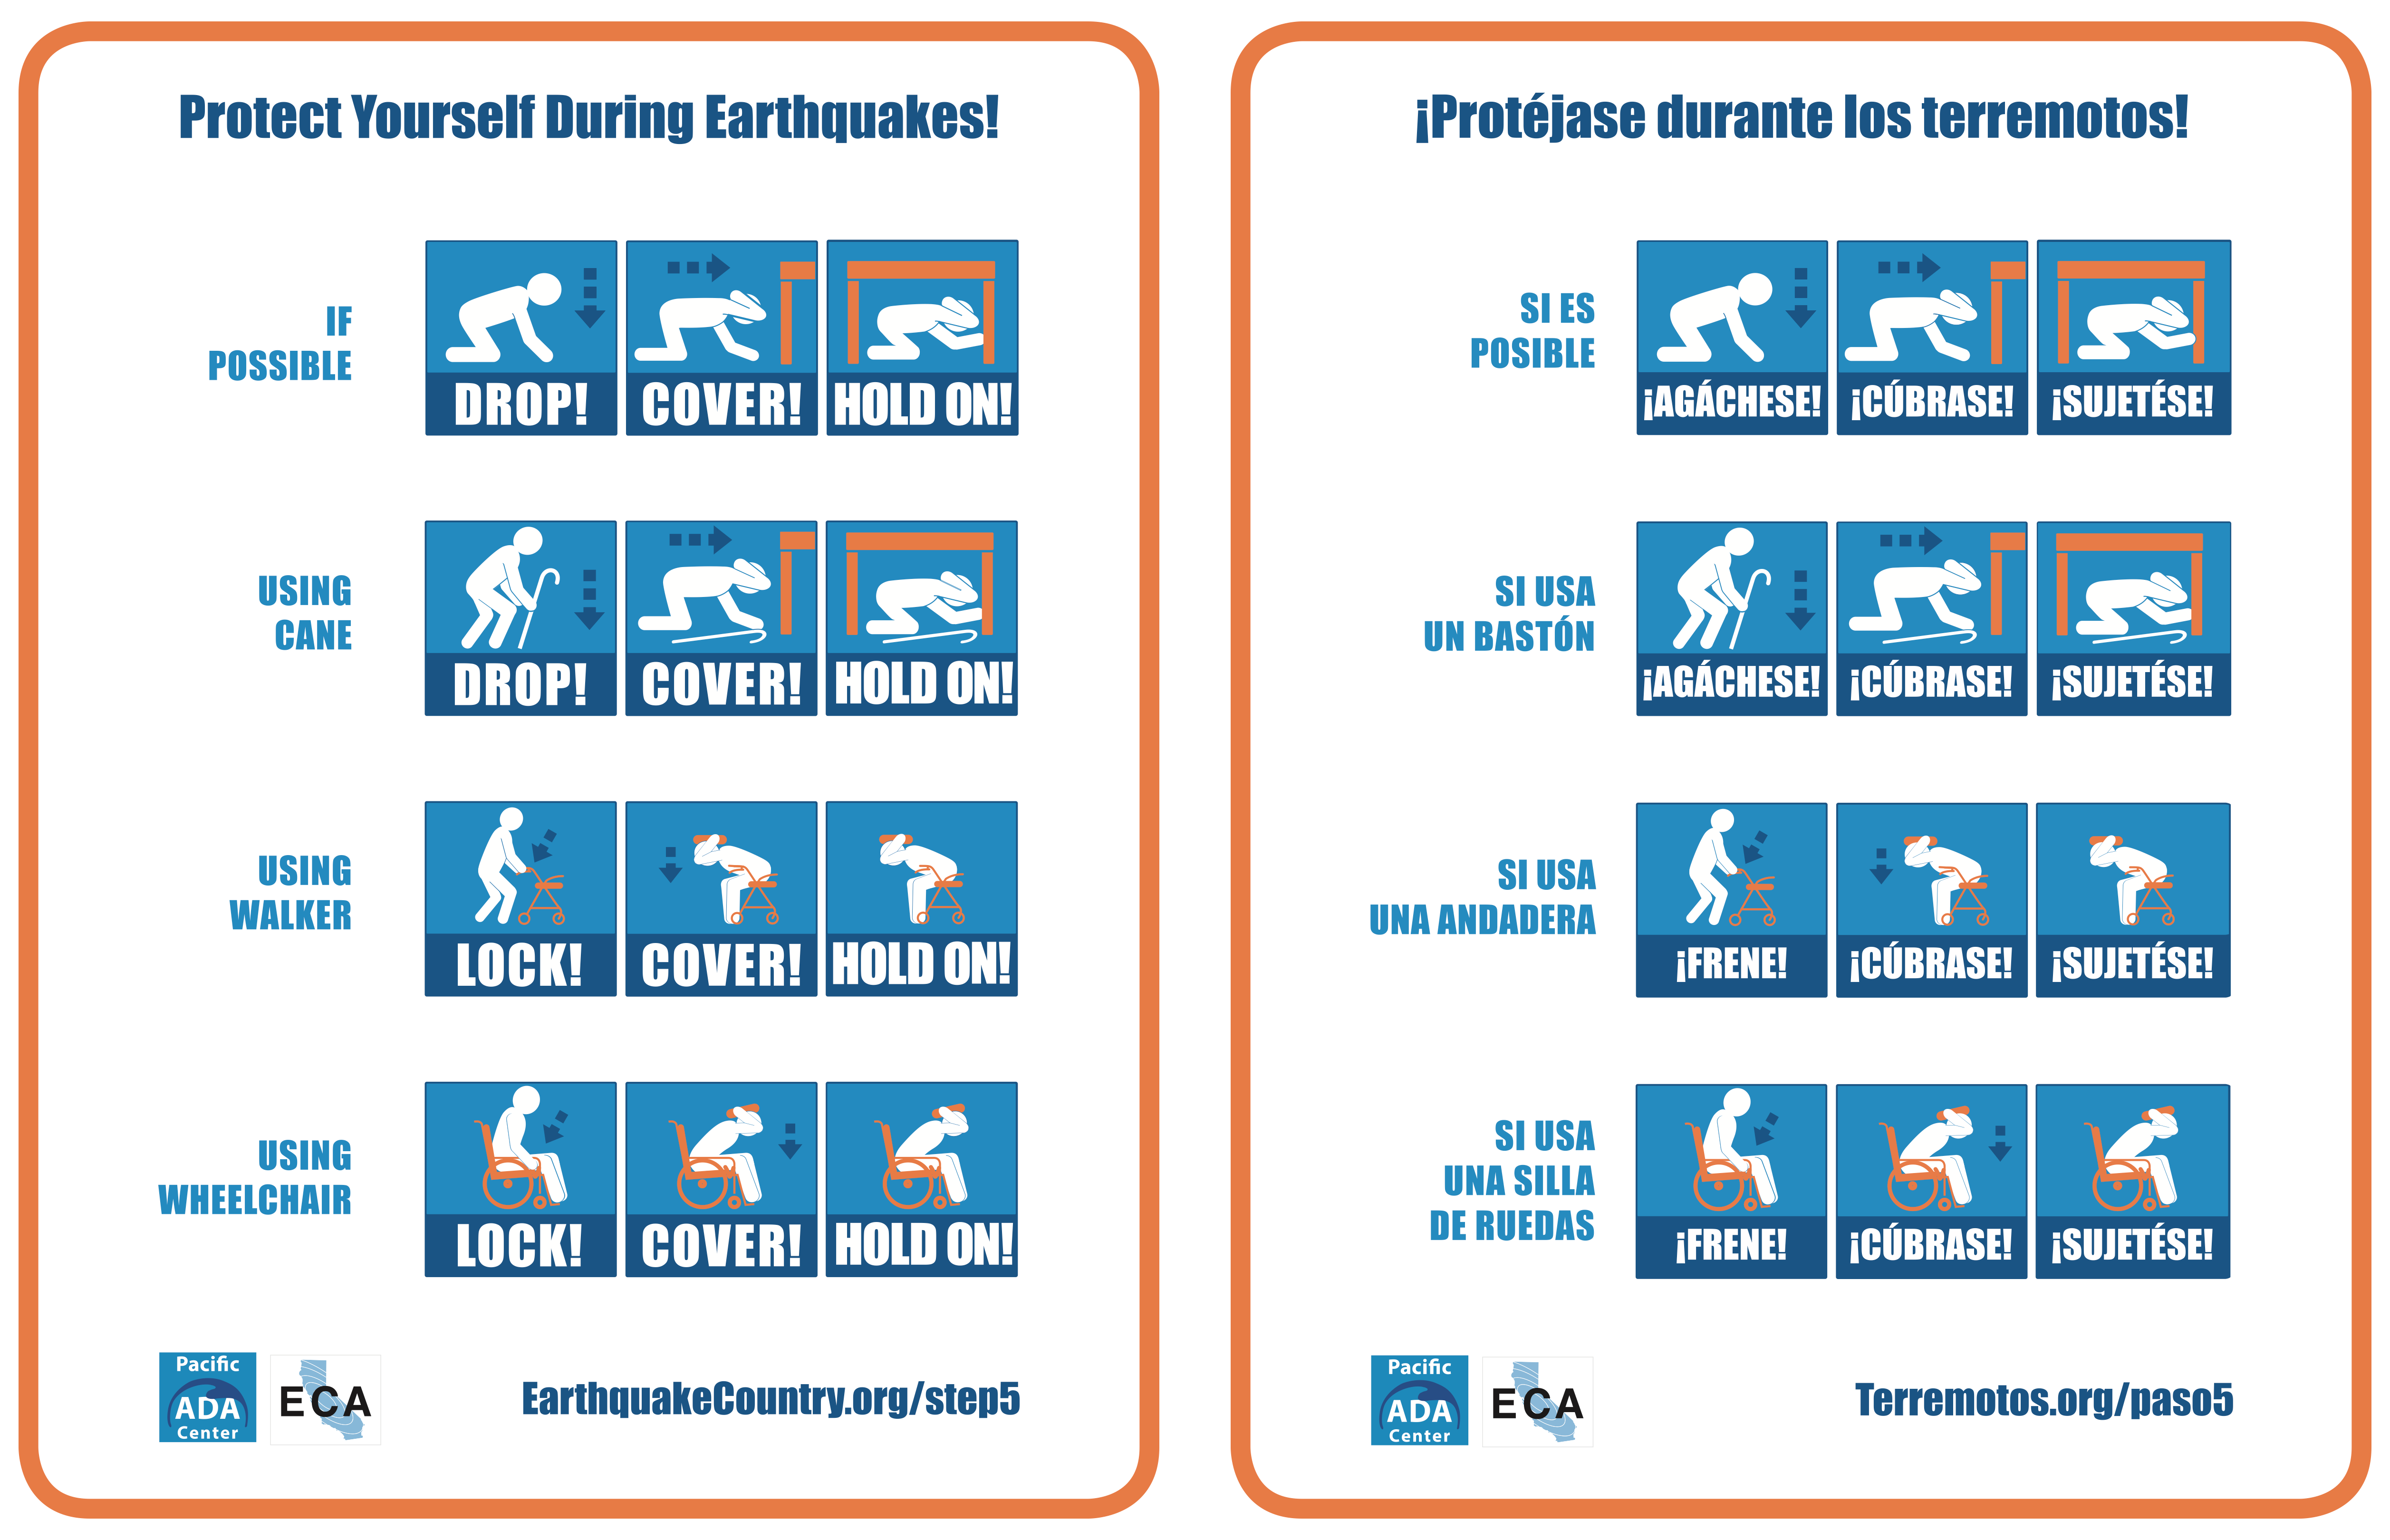 Protect Yourself During Earthquakes